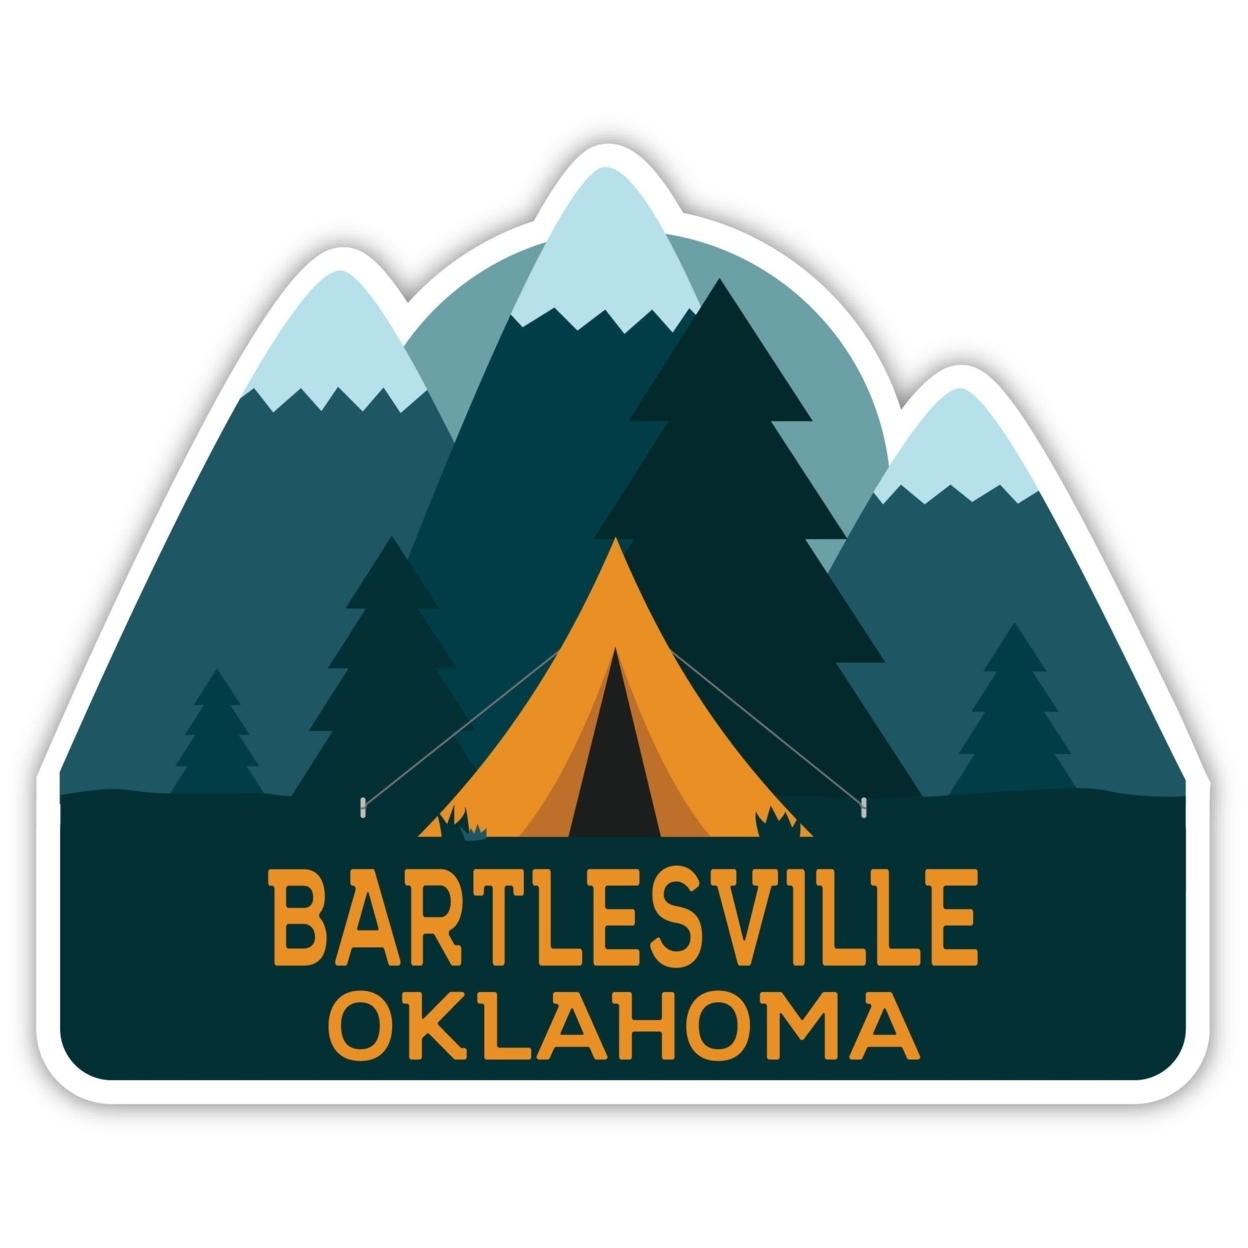 Bartlesville Oklahoma Souvenir Decorative Stickers (Choose Theme And Size) - 4-Pack, 8-Inch, Tent